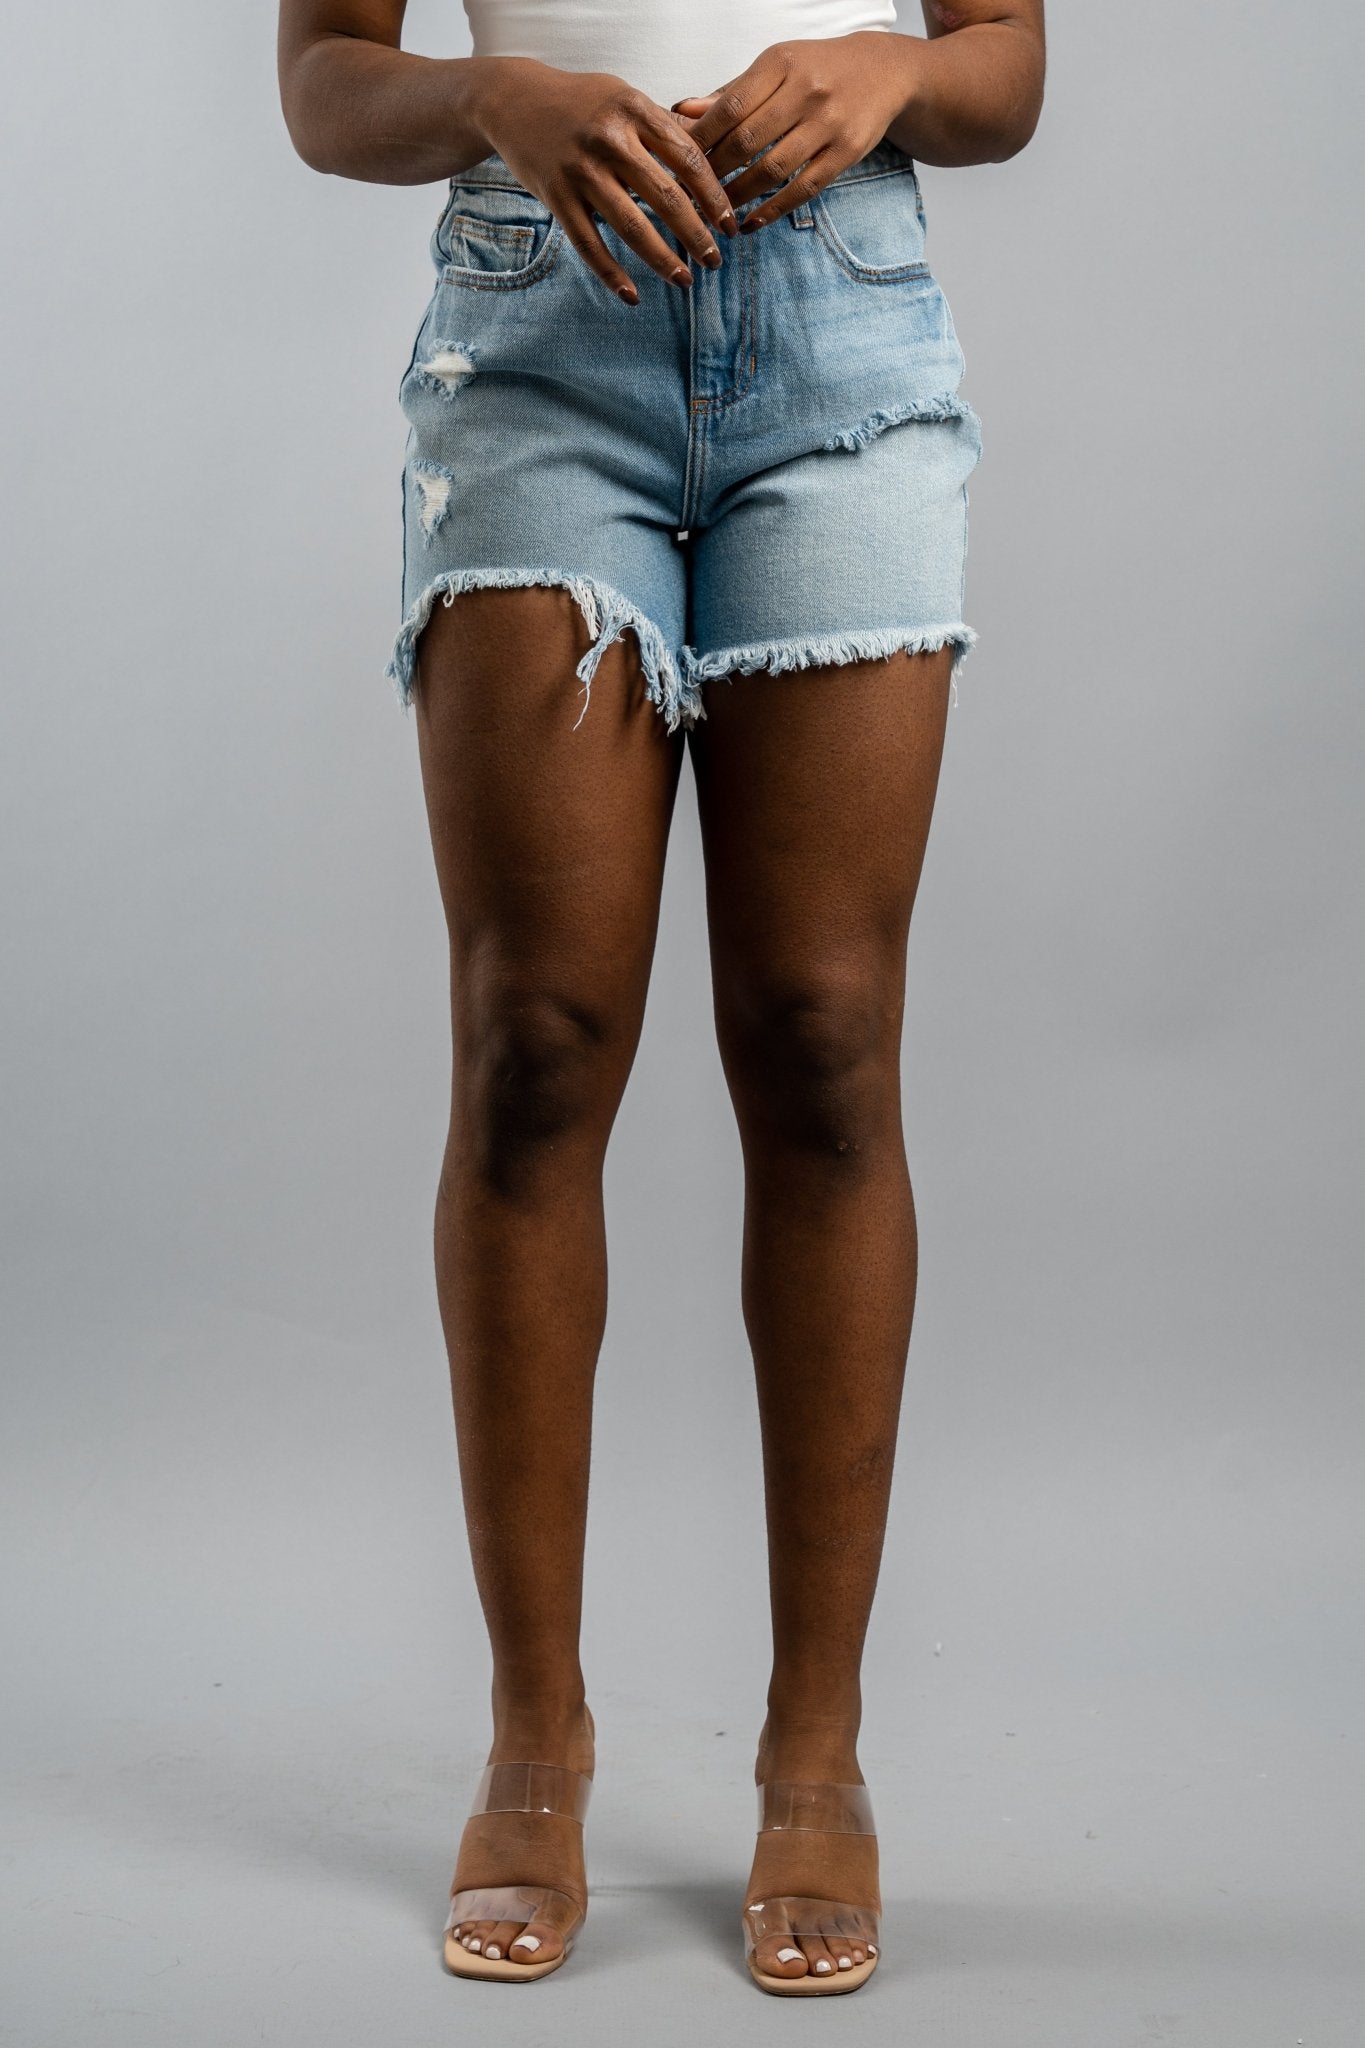 Cello Jeans  Easy High Rise Cuffed Hem Shorts WV47755MD